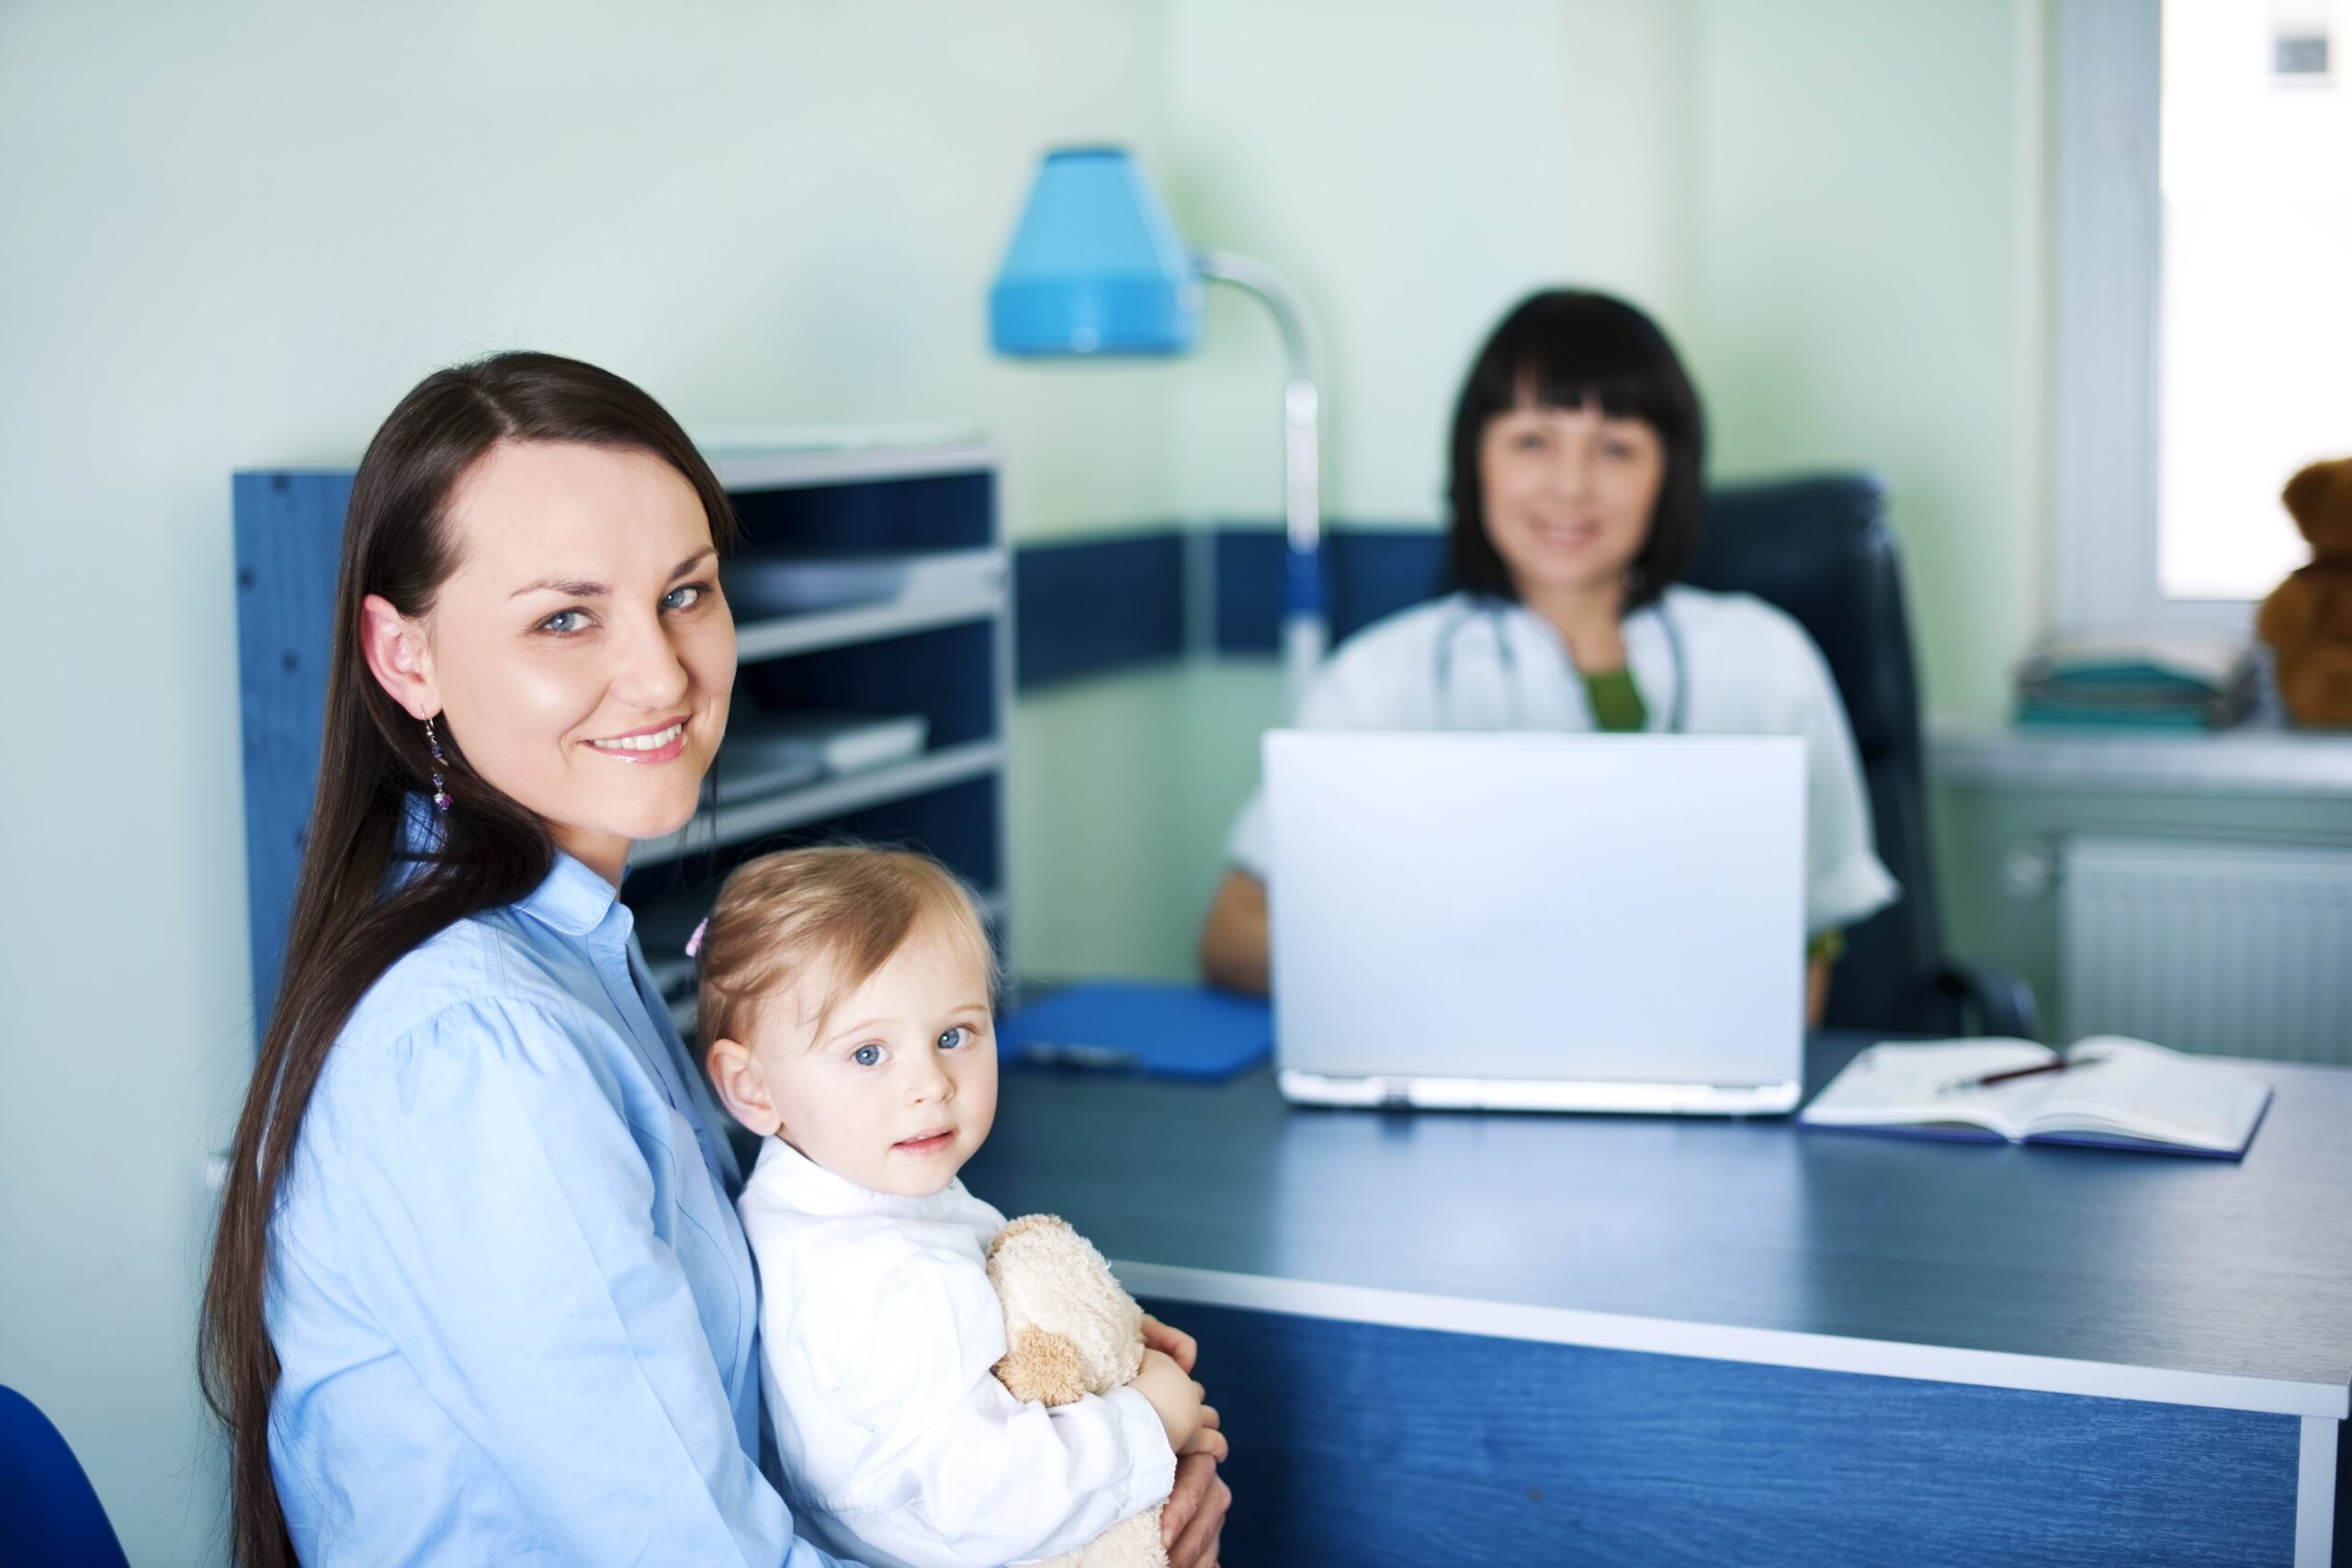 How To Become a Maternity Support Worker & Health Care Assistant - Studyhub